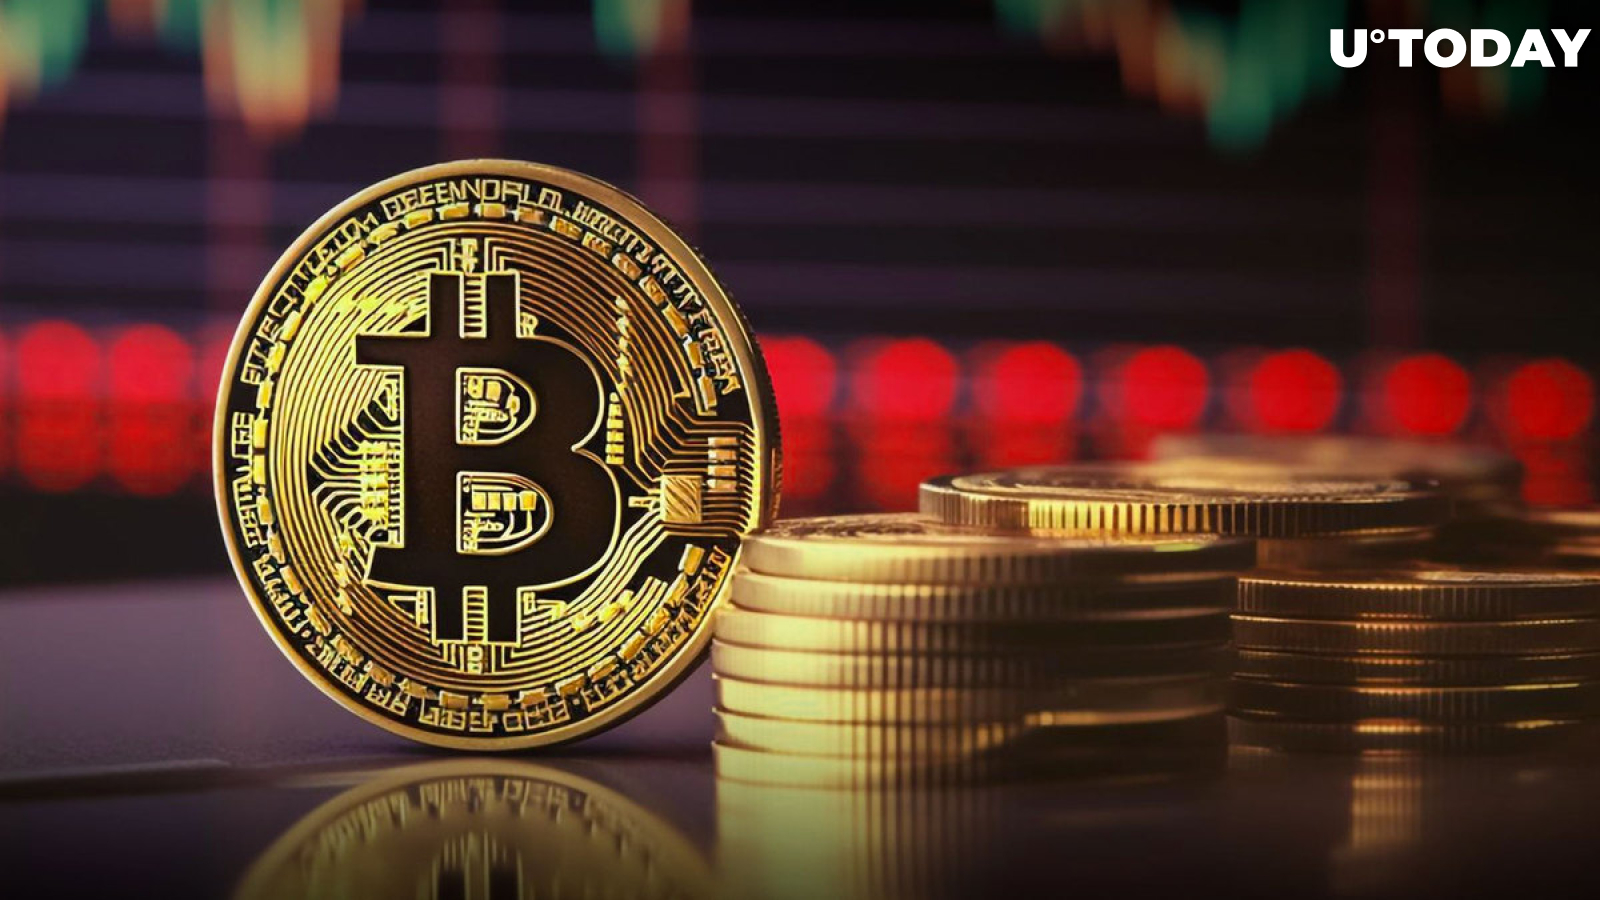 Bitcoin Price Alert: Key Indicator Issues Warning, But There's a Catch